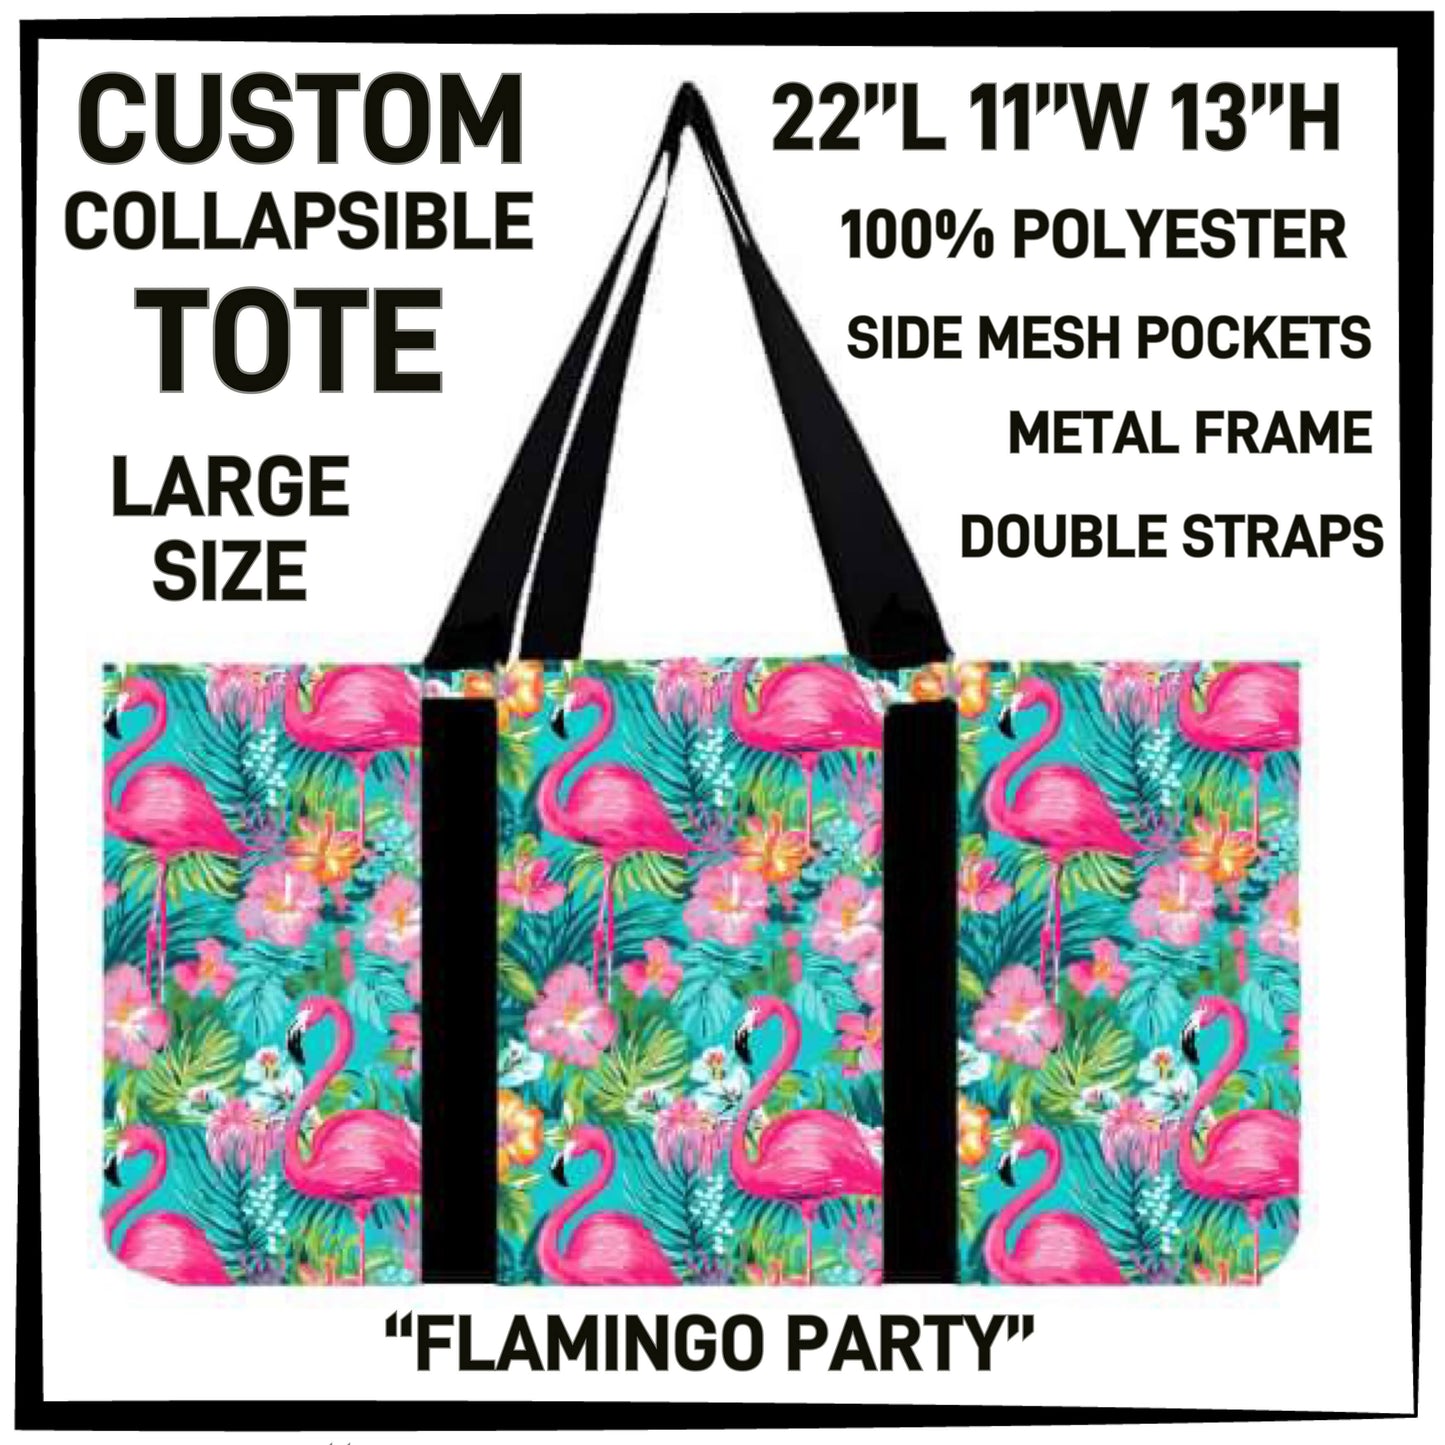 RTS - Flamingo Party Collapsible Tote